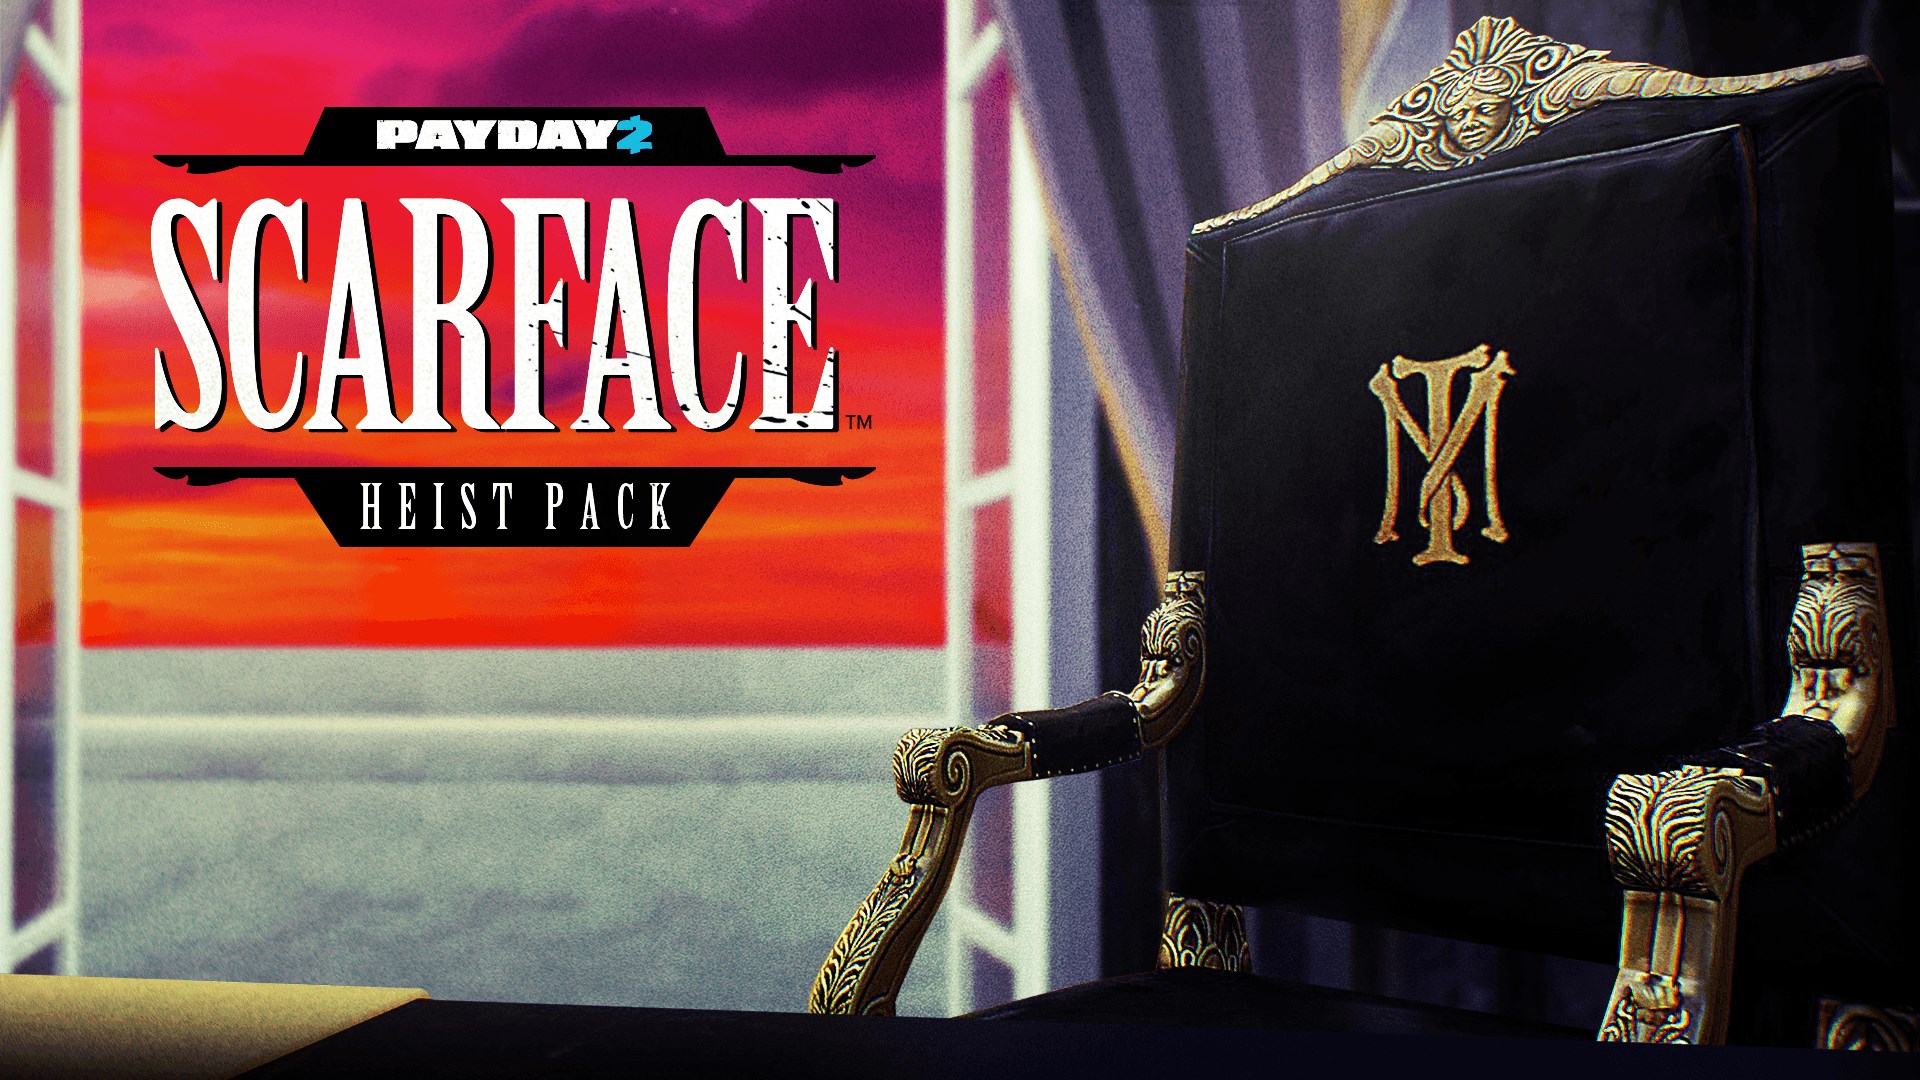 Scarface character pack for payday 2 фото 66